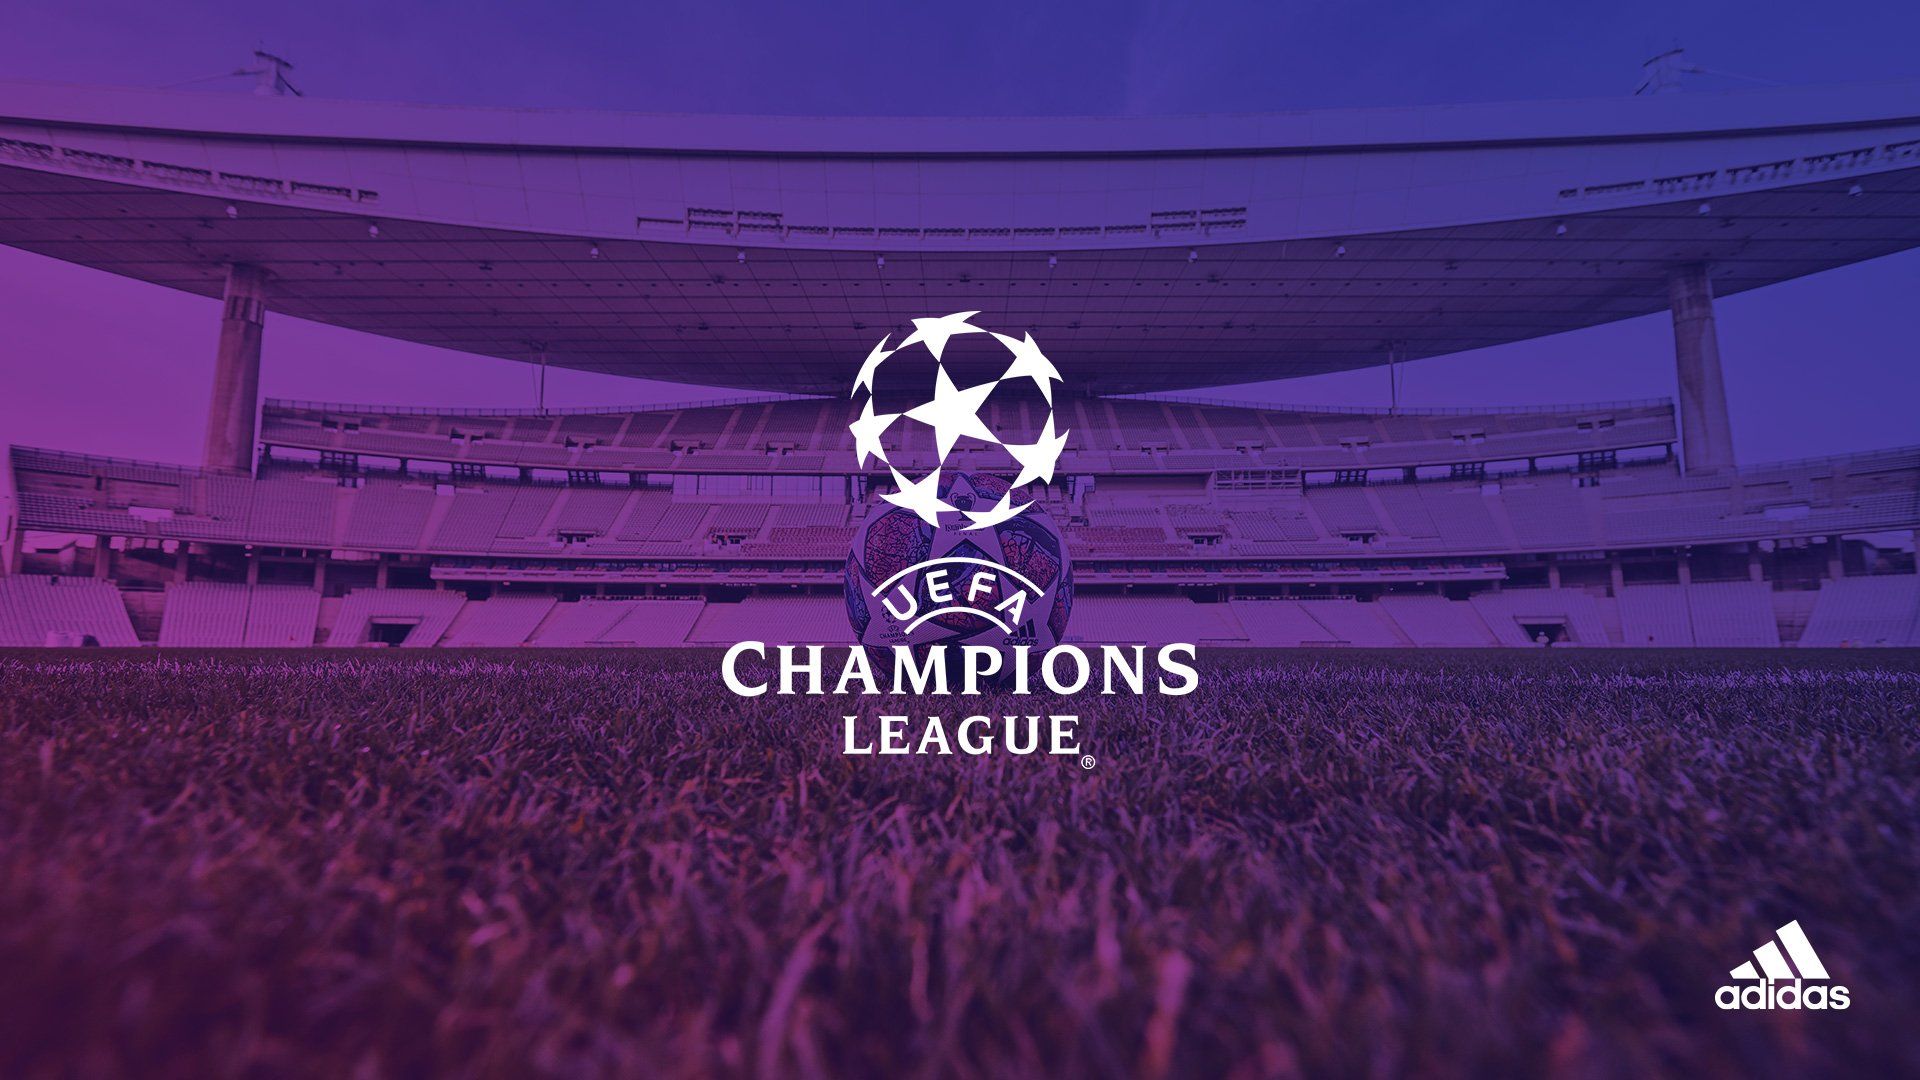 Win tickets to the UEFA Champions League final 2020!